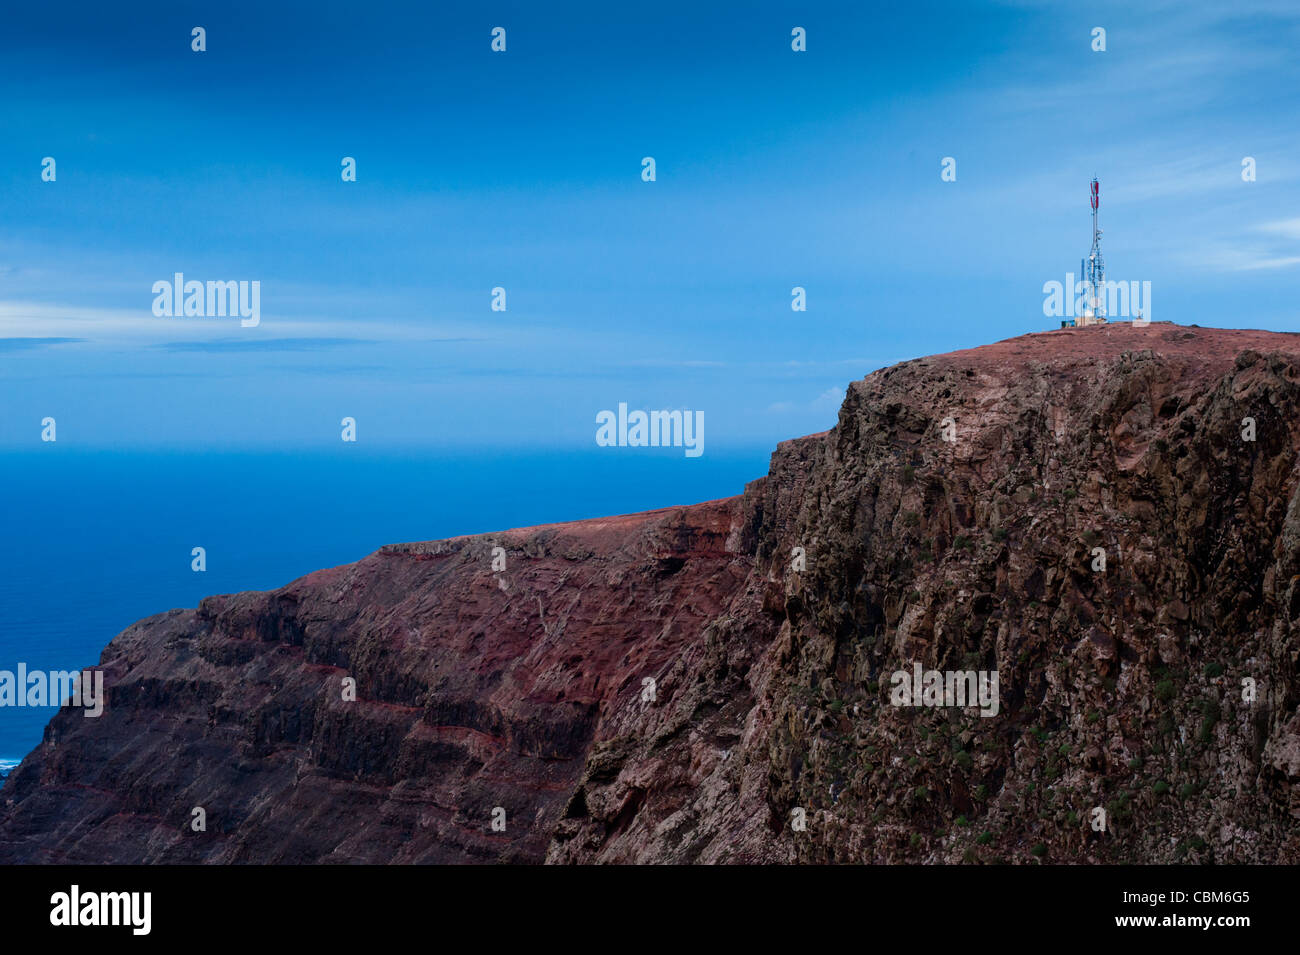 Communications tower as seen at dawn on a windy day from Mirador del Río, Lanzarote, Canary Islands, Spain. Stock Photo